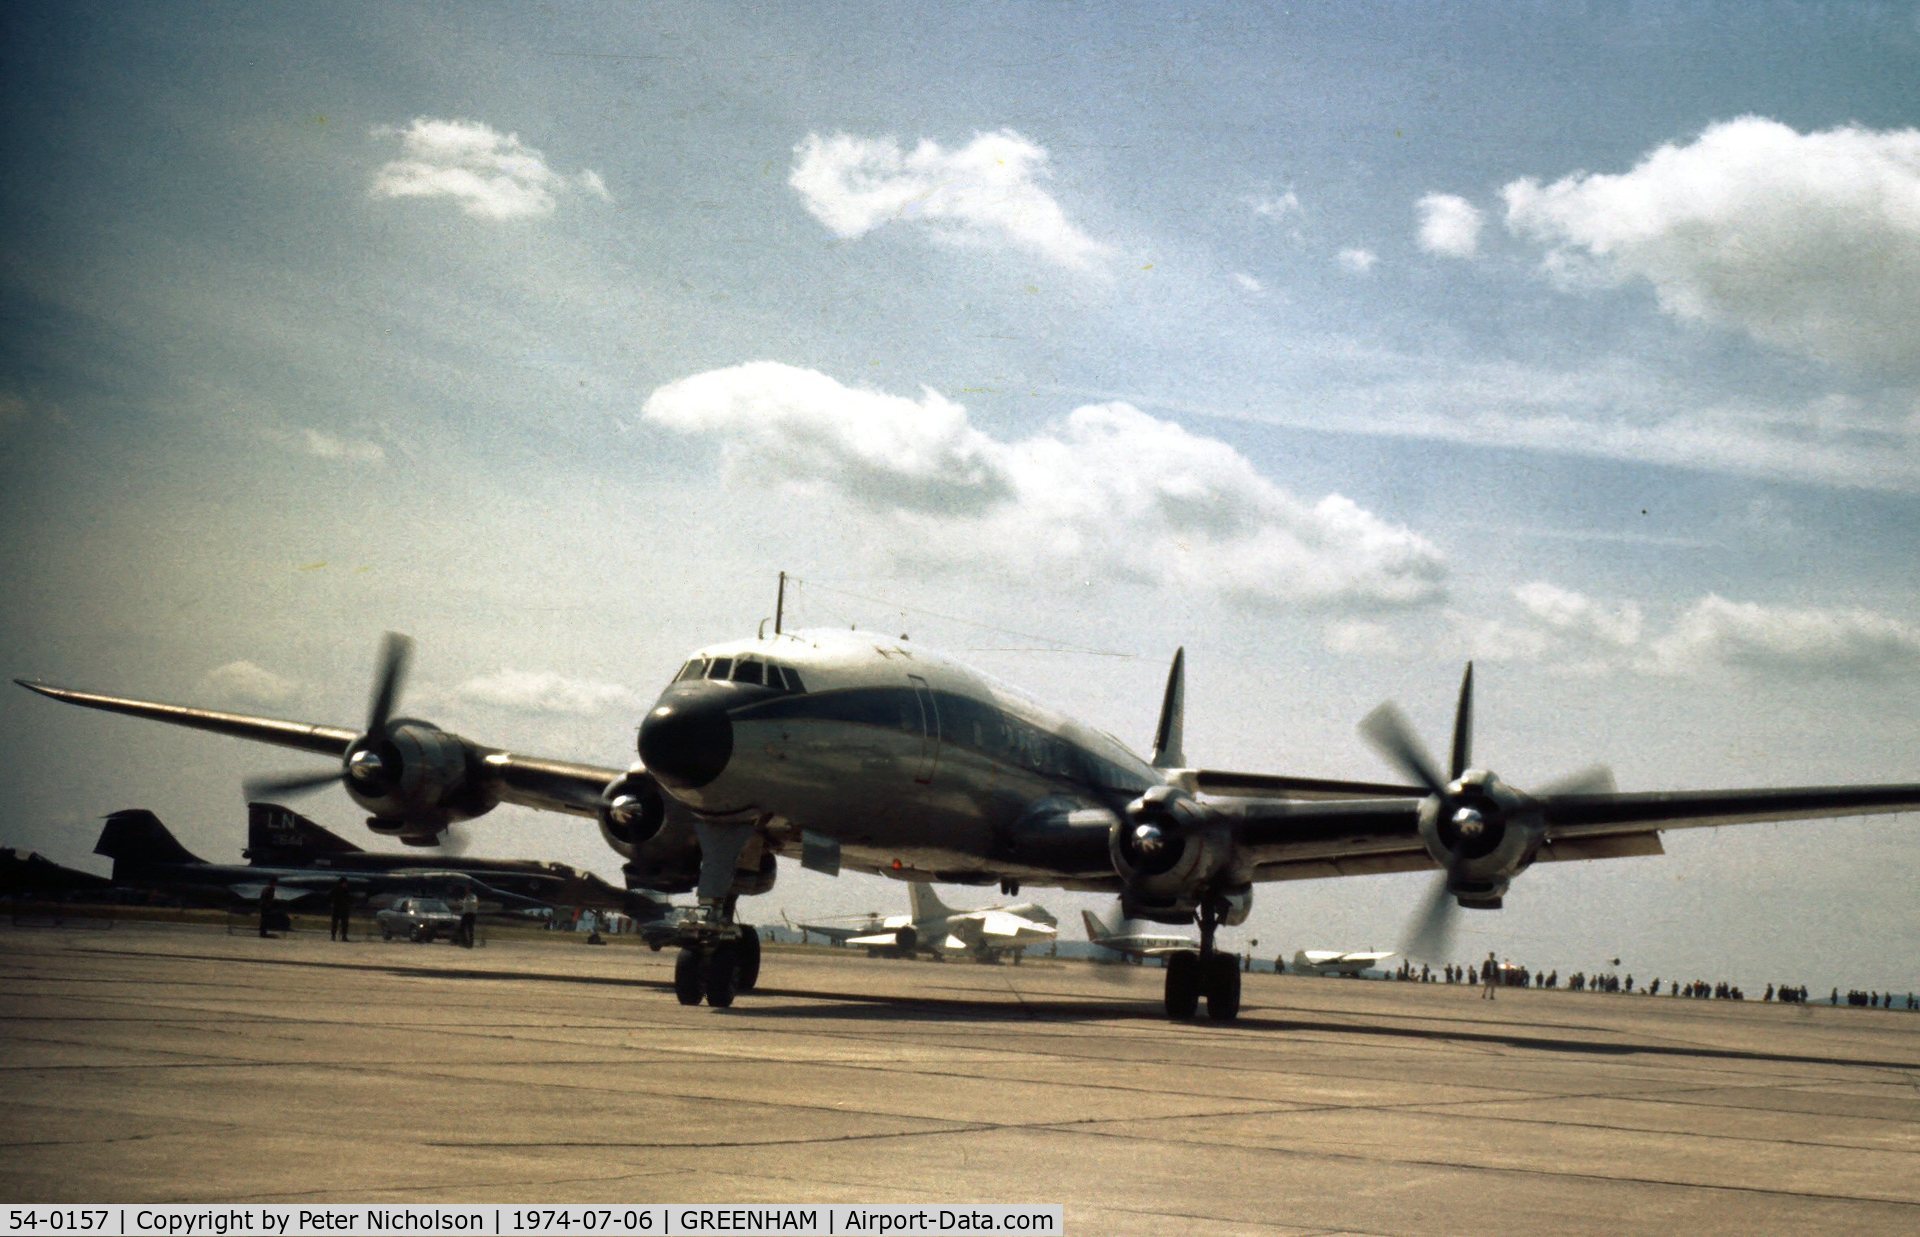 54-0157, 1955 Lockheed L-1049F Super Constellation C/N 4176, C-121C Constellation of 193rd Tactical Electronic Warfare Squadron of Pennsylvanian ANG at the 1974 Intnl Air Tattoo at RAF Greenham Common.